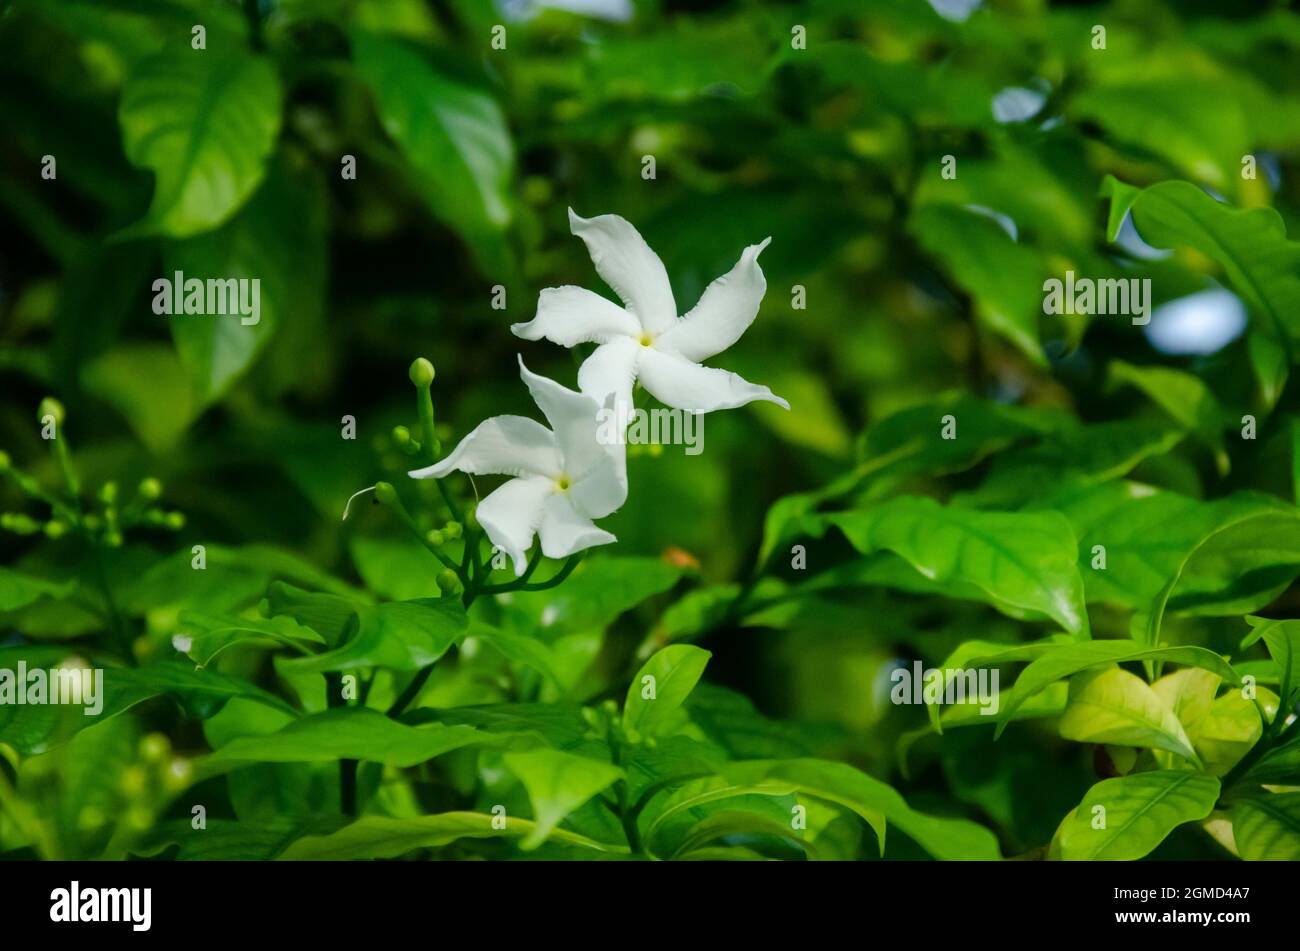 Selective focus on beautiful CREPE JASMINE plant with two white flowers and green leaves isolated with blur background in park in morning sunlight. Stock Photo